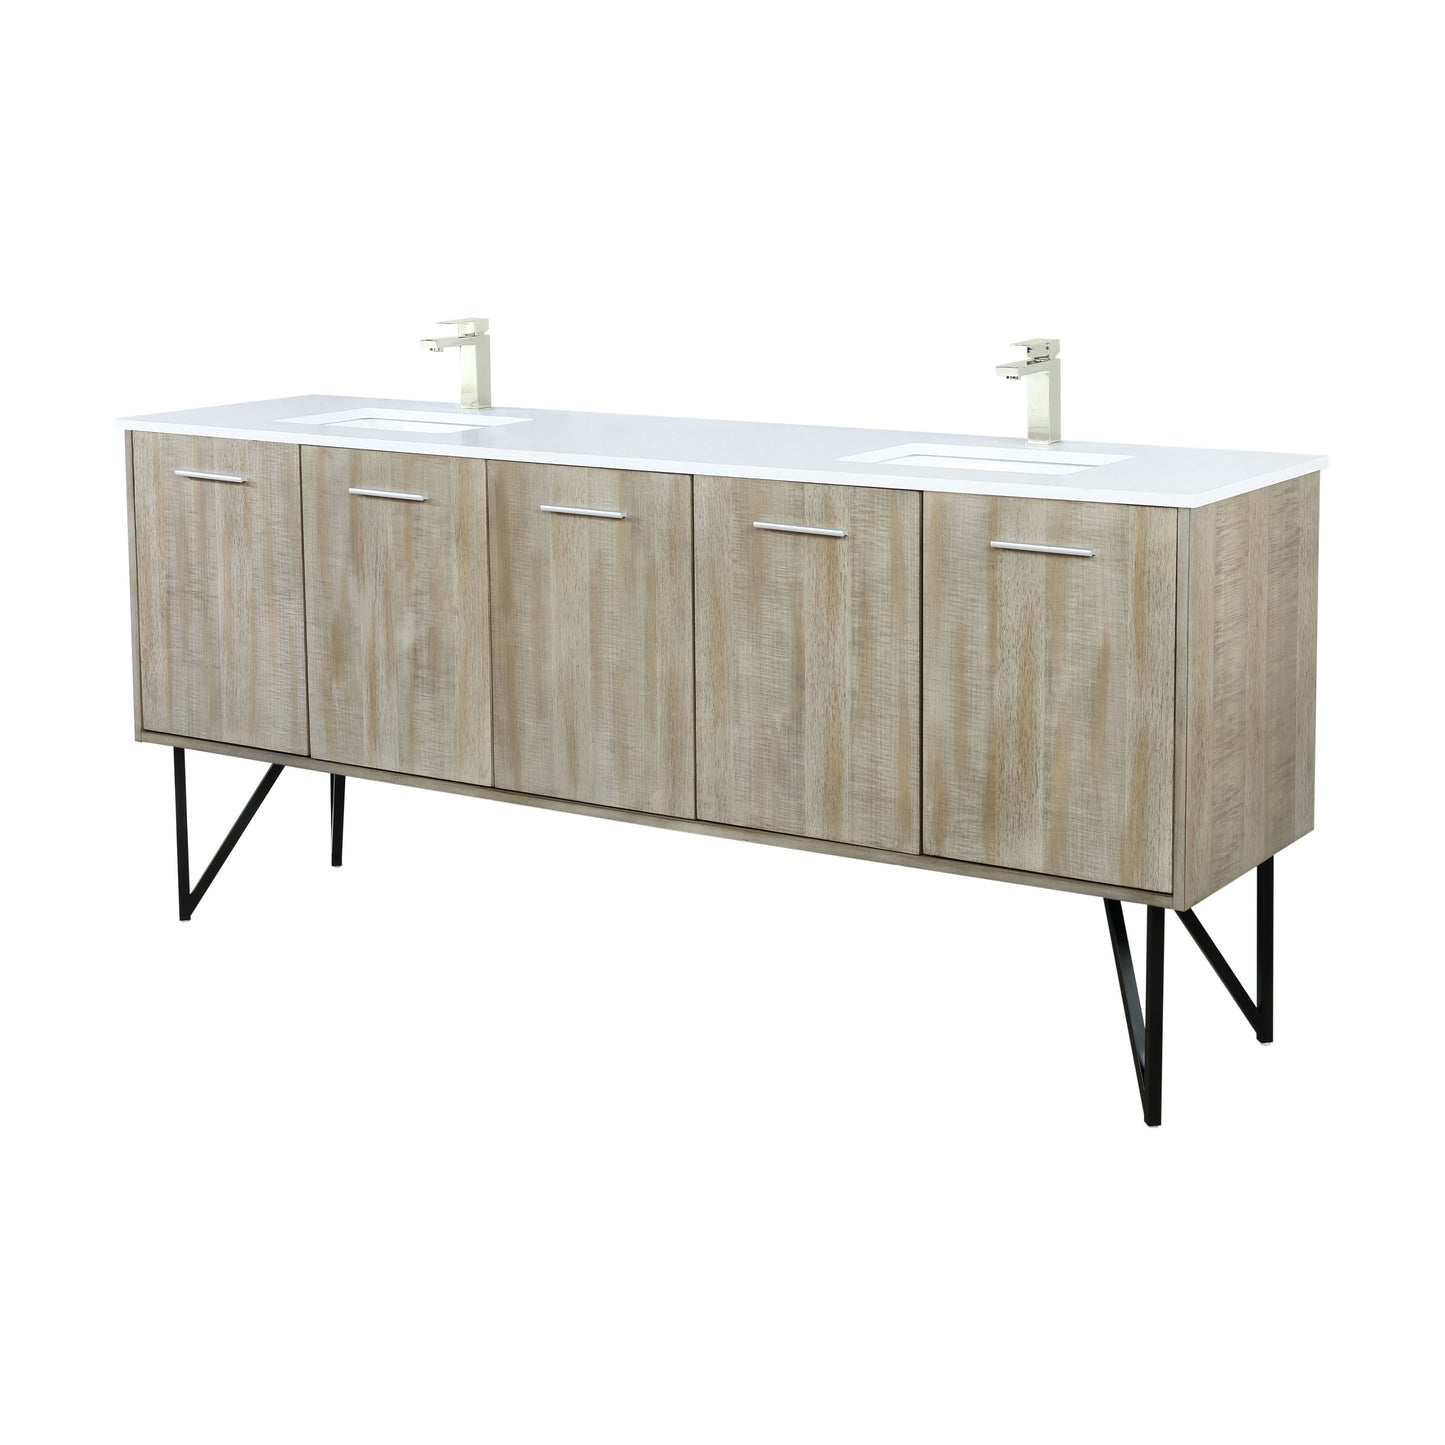 Lexora Collection Lancy 80 inch Rustic Acacia Double Bath Vanity, Cultured Marble Top and Faucet Set - Luxe Bathroom Vanities